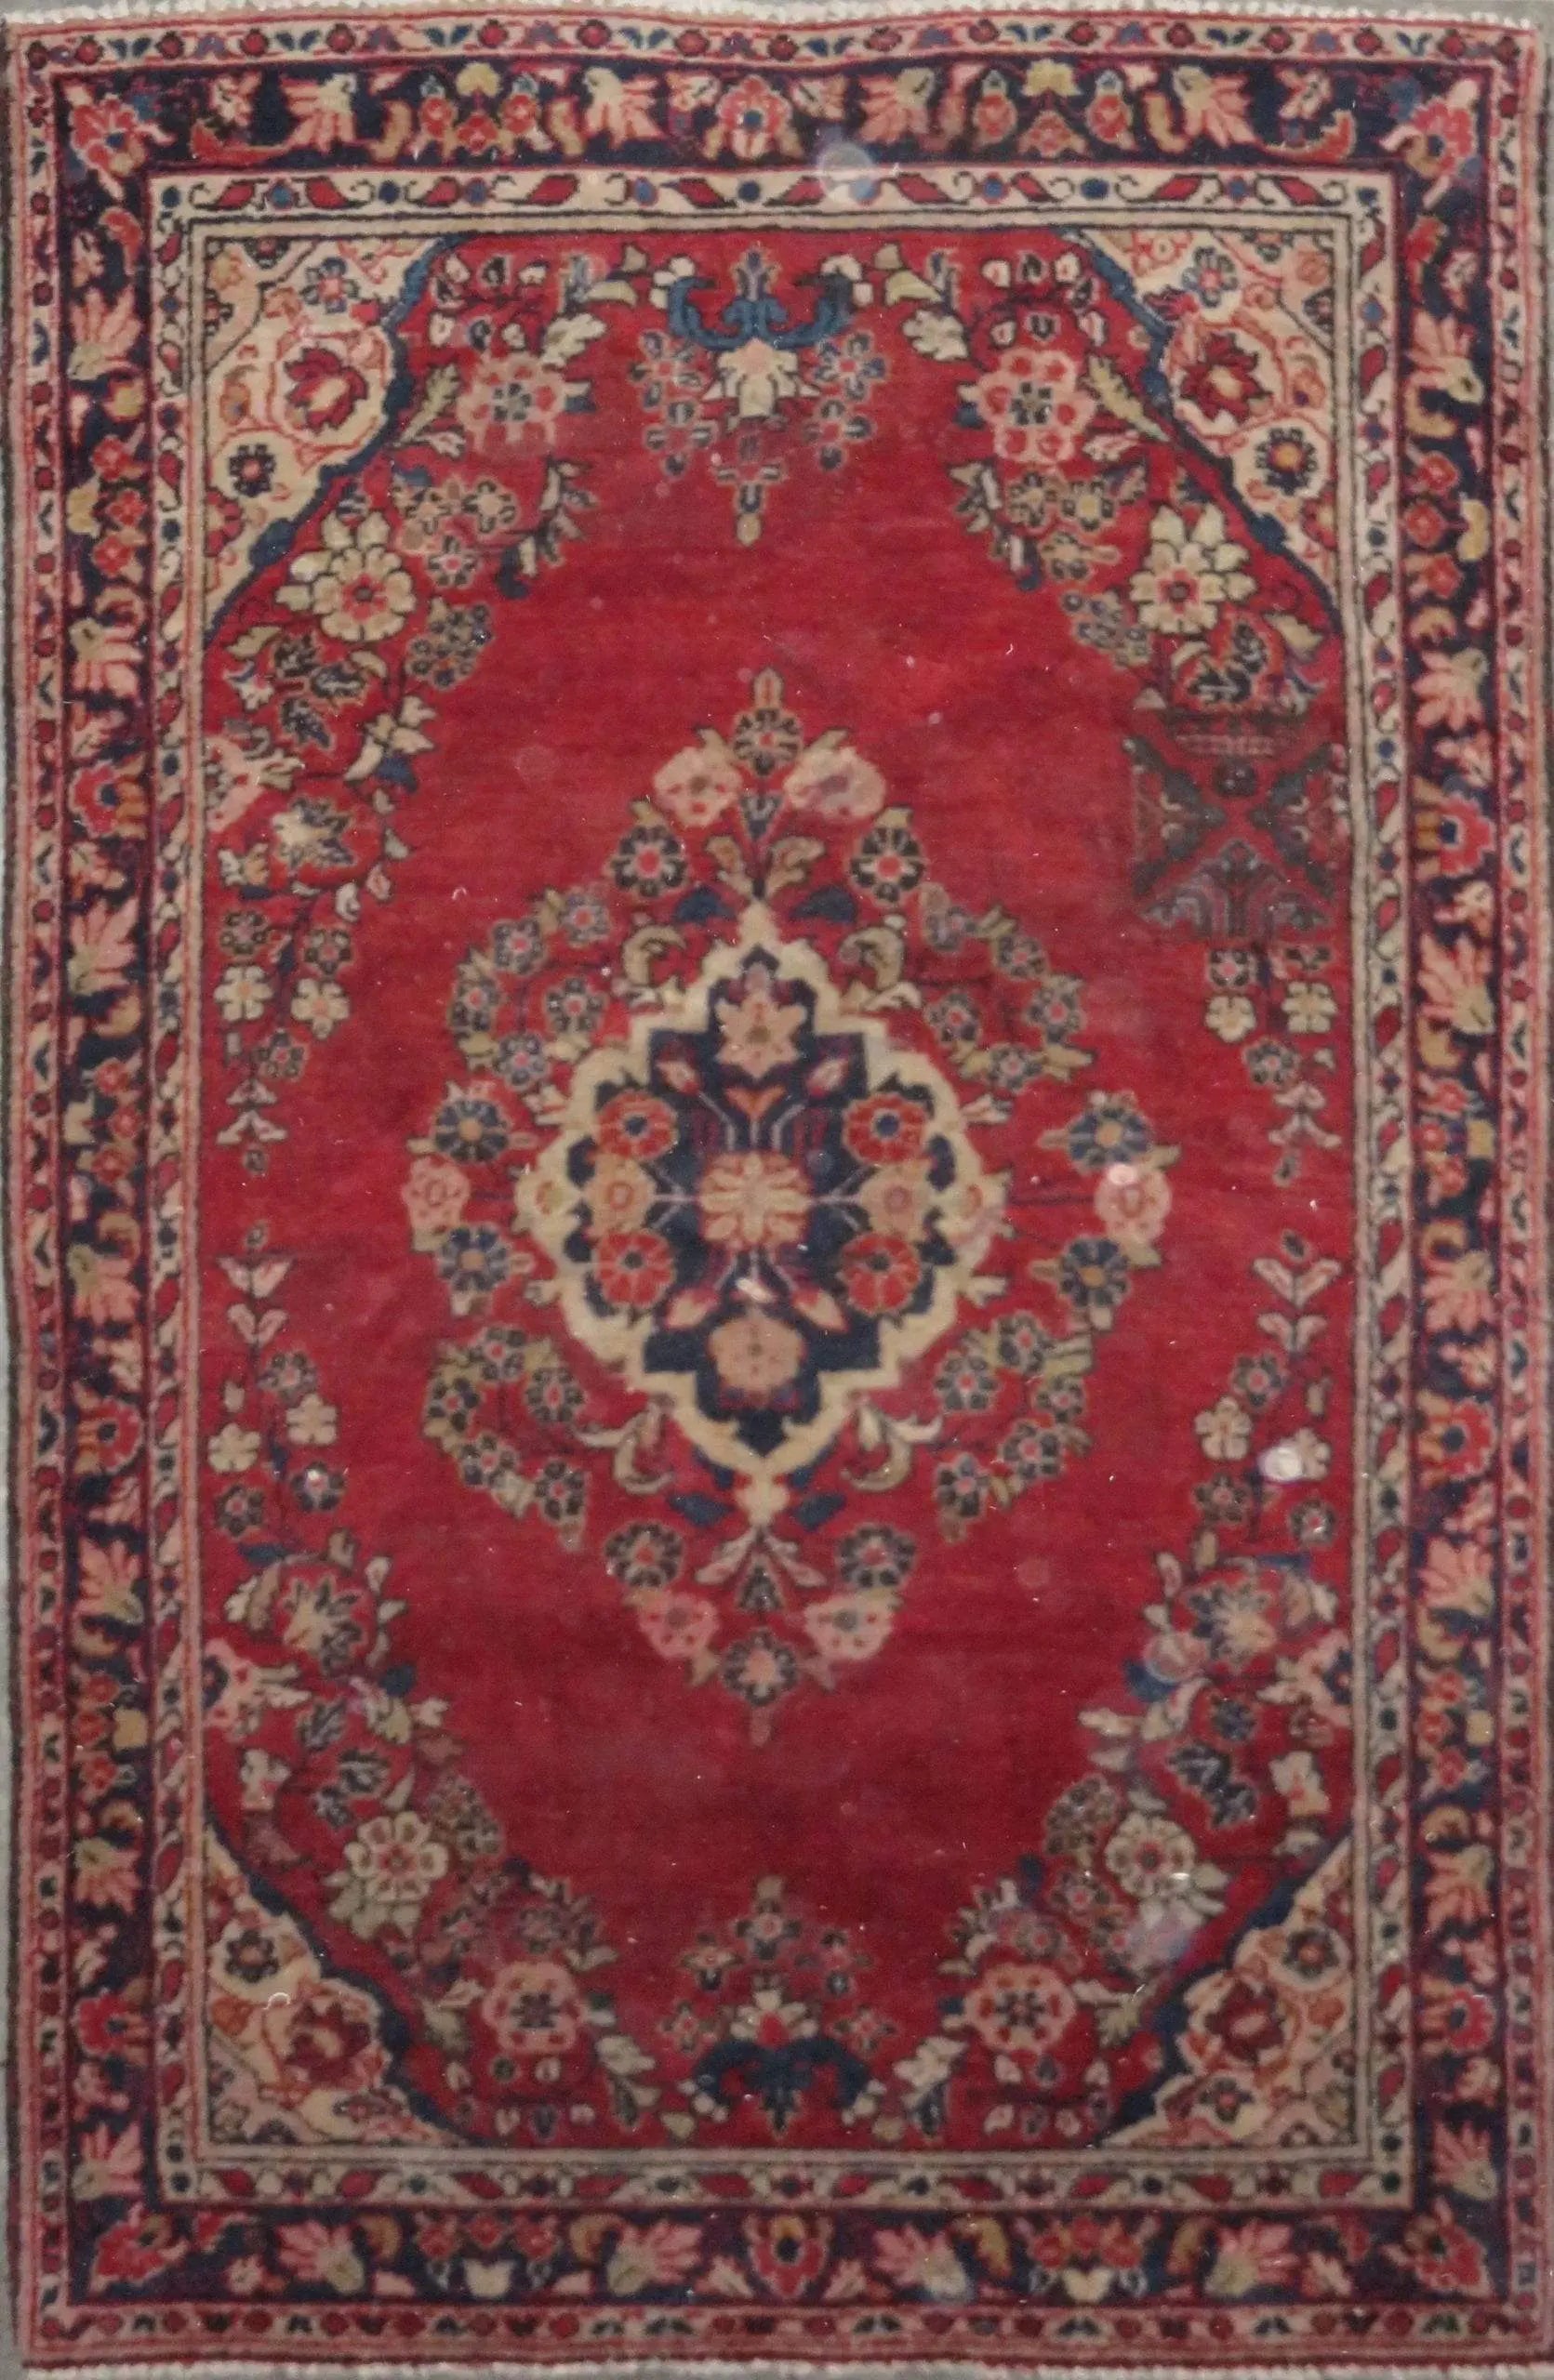 Hand-Knotted Persian Wool Rug _ Luxurious Vintage Design, 6'7" x 4'1", Artisan Crafted